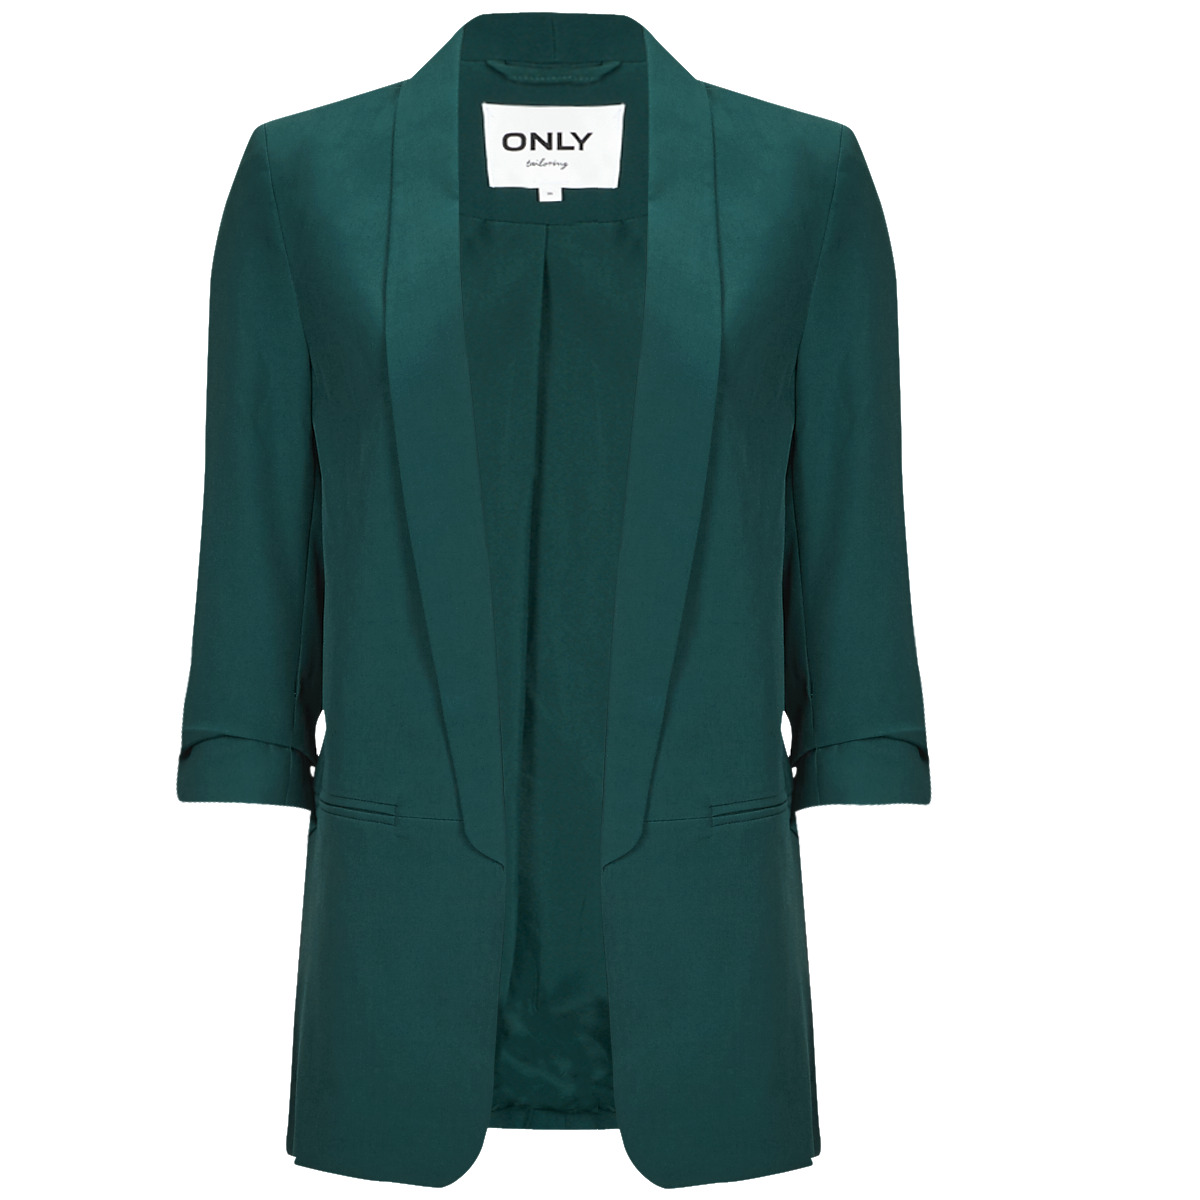 ONLELLY Green NET | LIFE Only delivery ! / Blazers Spartoo Jackets TLR BLAZER - Free - Clothing Women 3/4